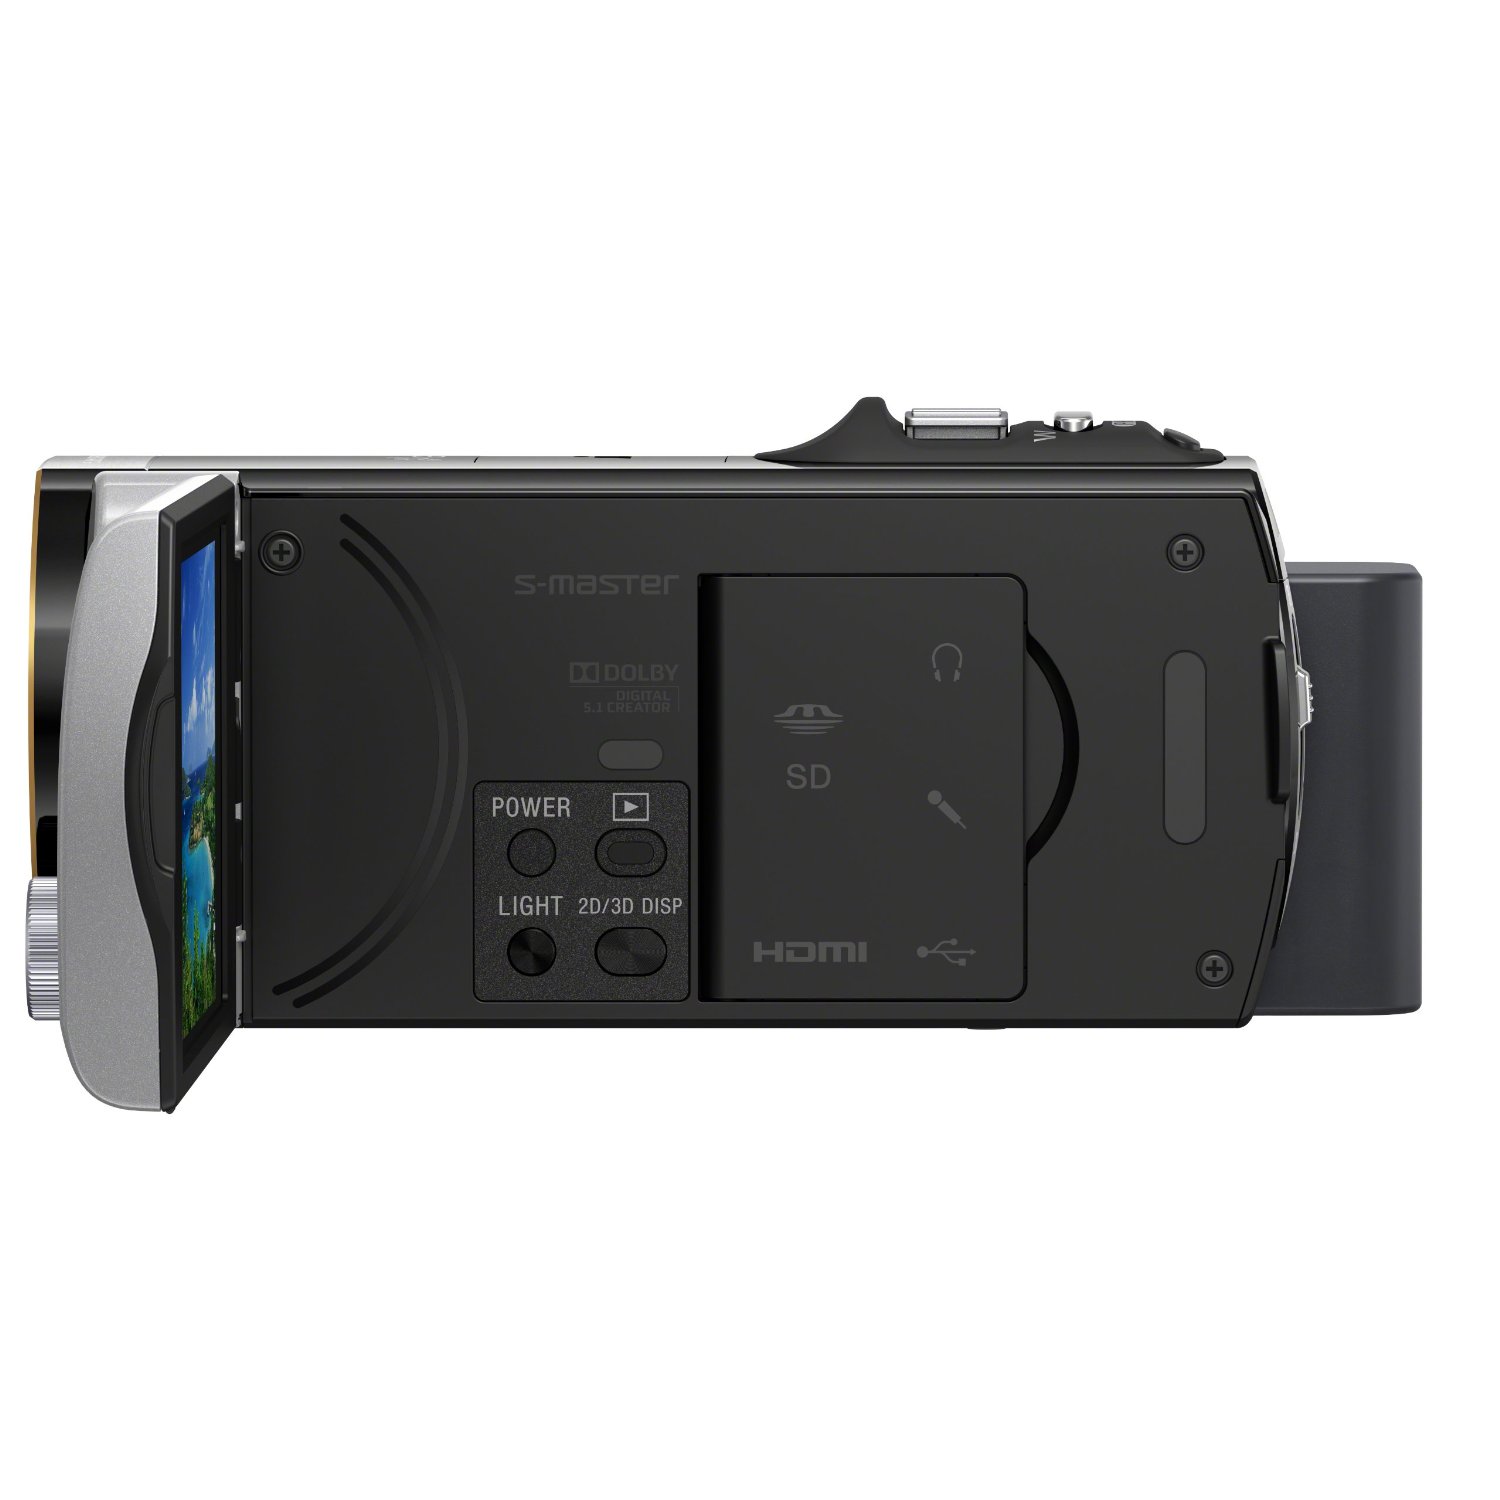 http://thetechjournal.com/wp-content/uploads/images/1203/1333213211-sony-hdrtd20v-hd-handycam-204-mp-3d-camcorder-7.jpg